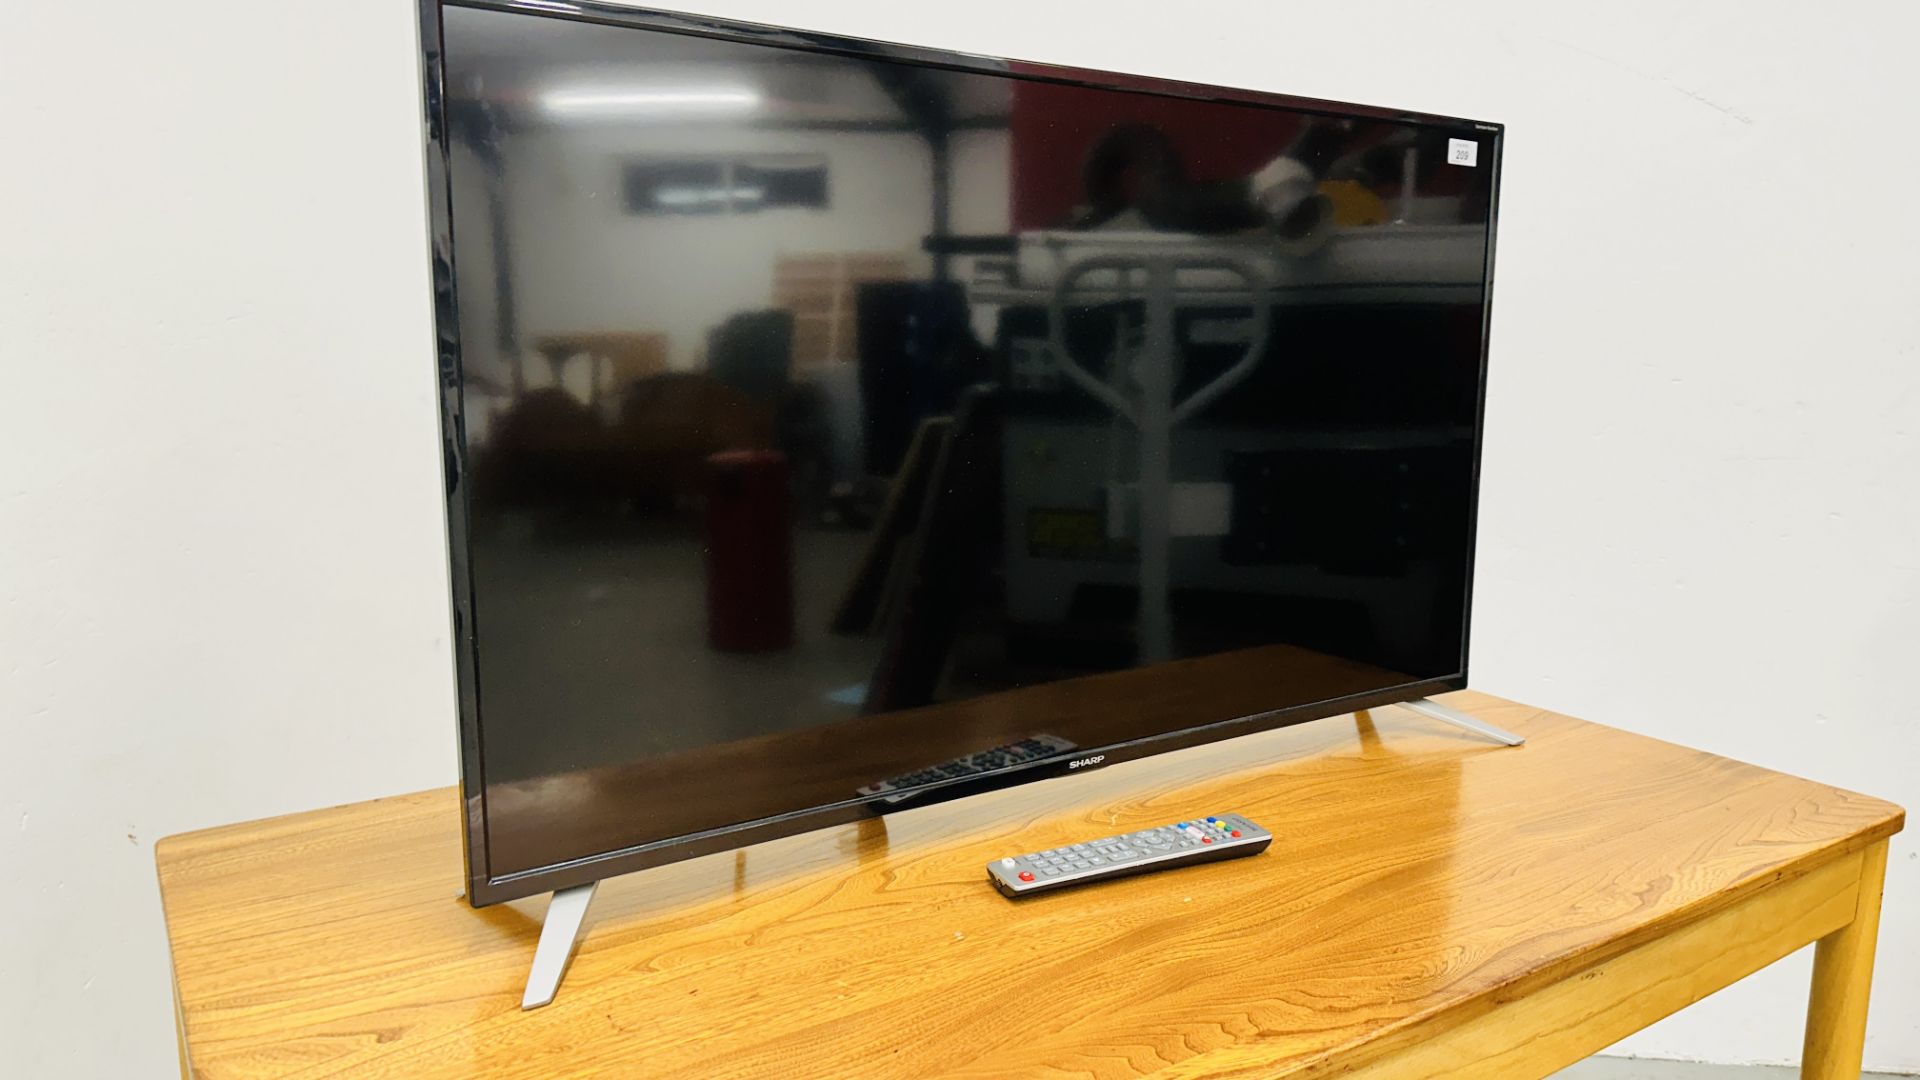 SHARP 42" FLAT SCREEN TV WITH REMOTE - SOLD AS SEEN. - Bild 2 aus 5